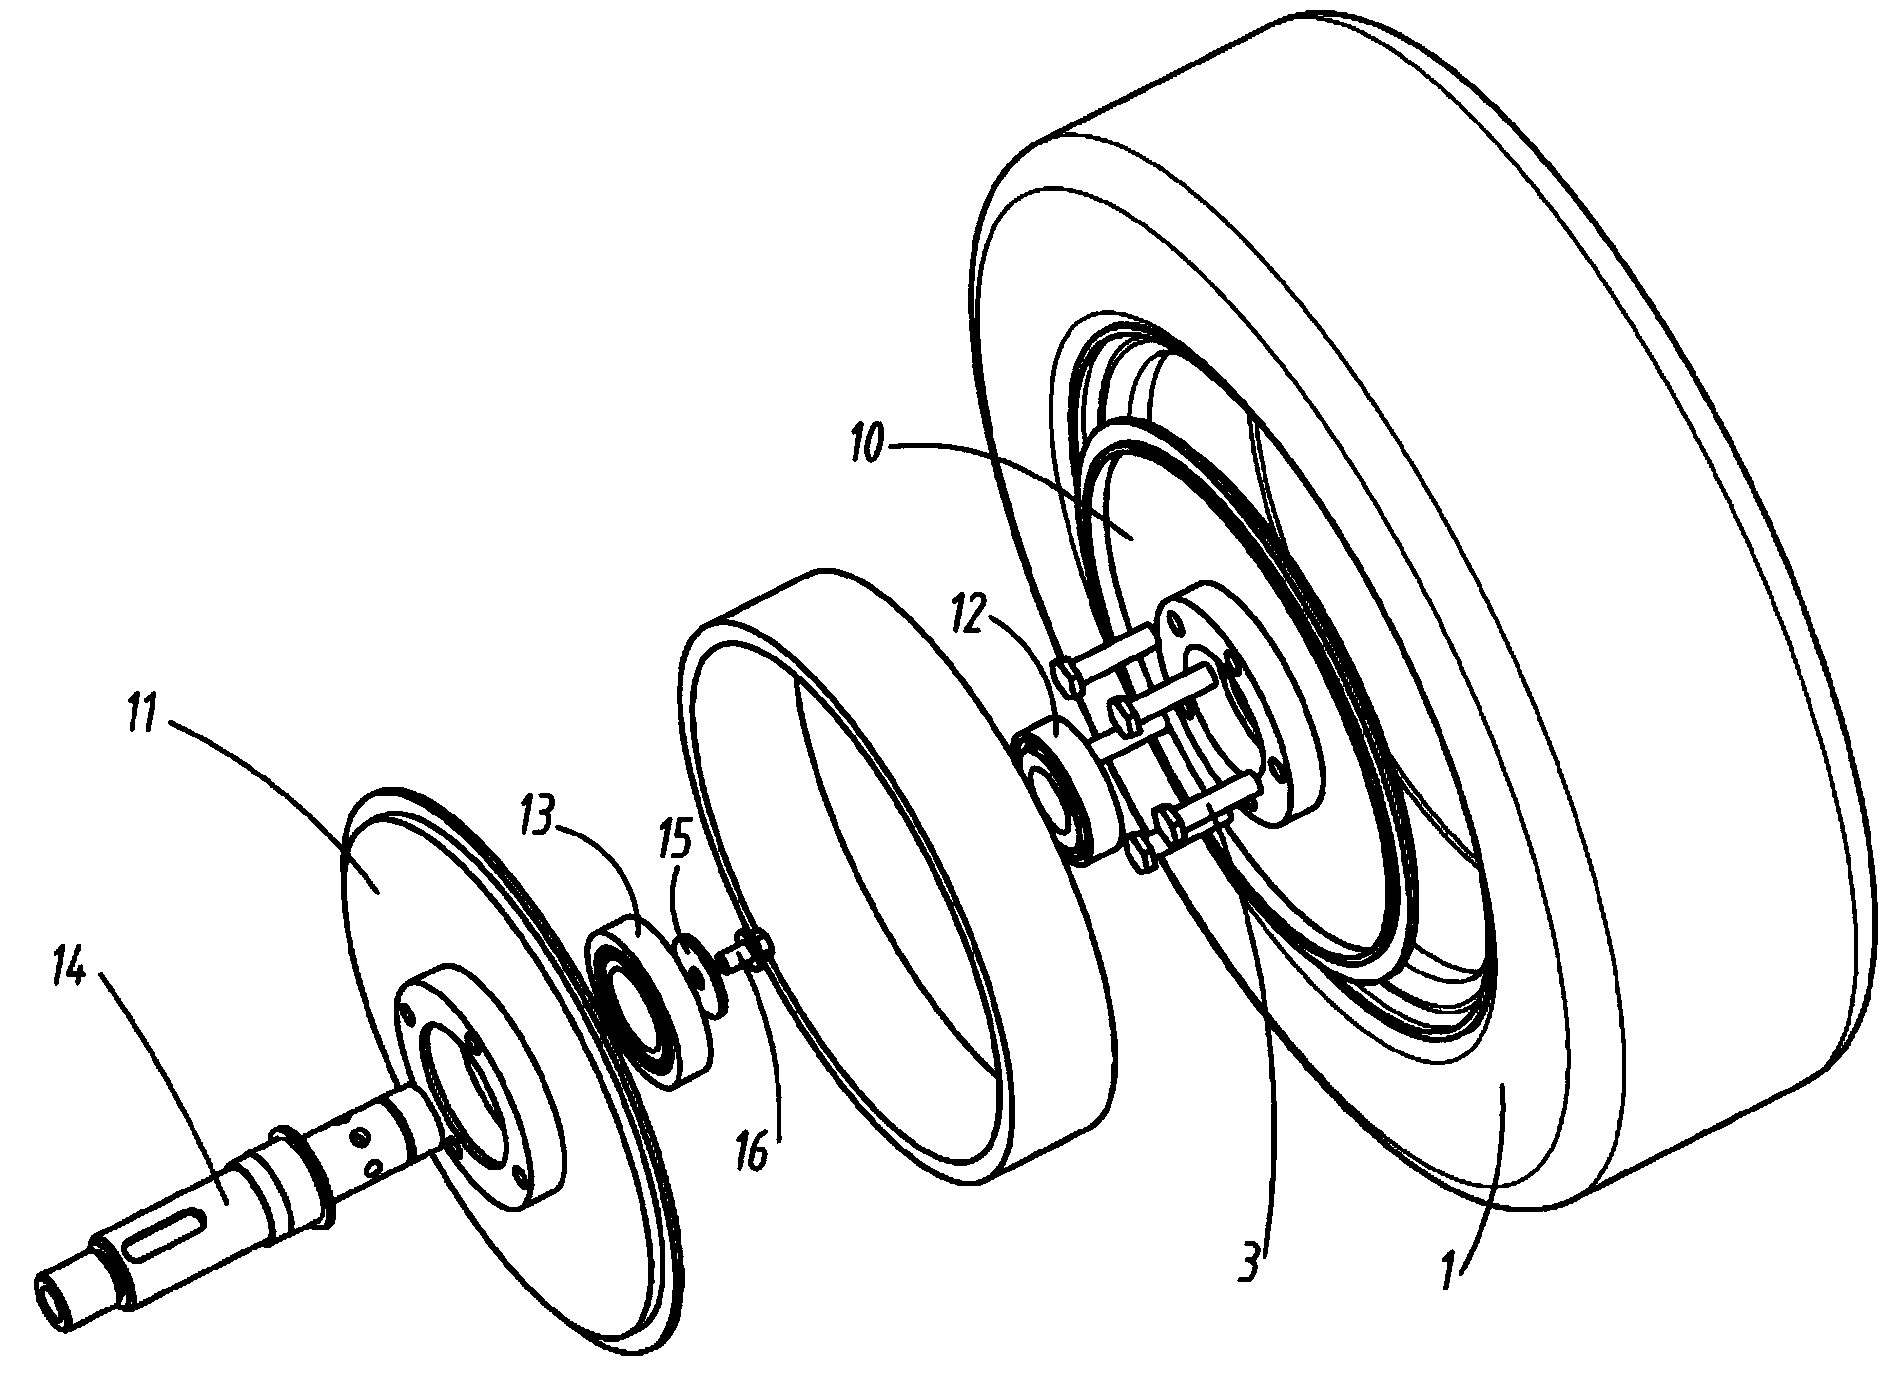 Split electric wheel system with excitation-free electromagnetic parking braking device